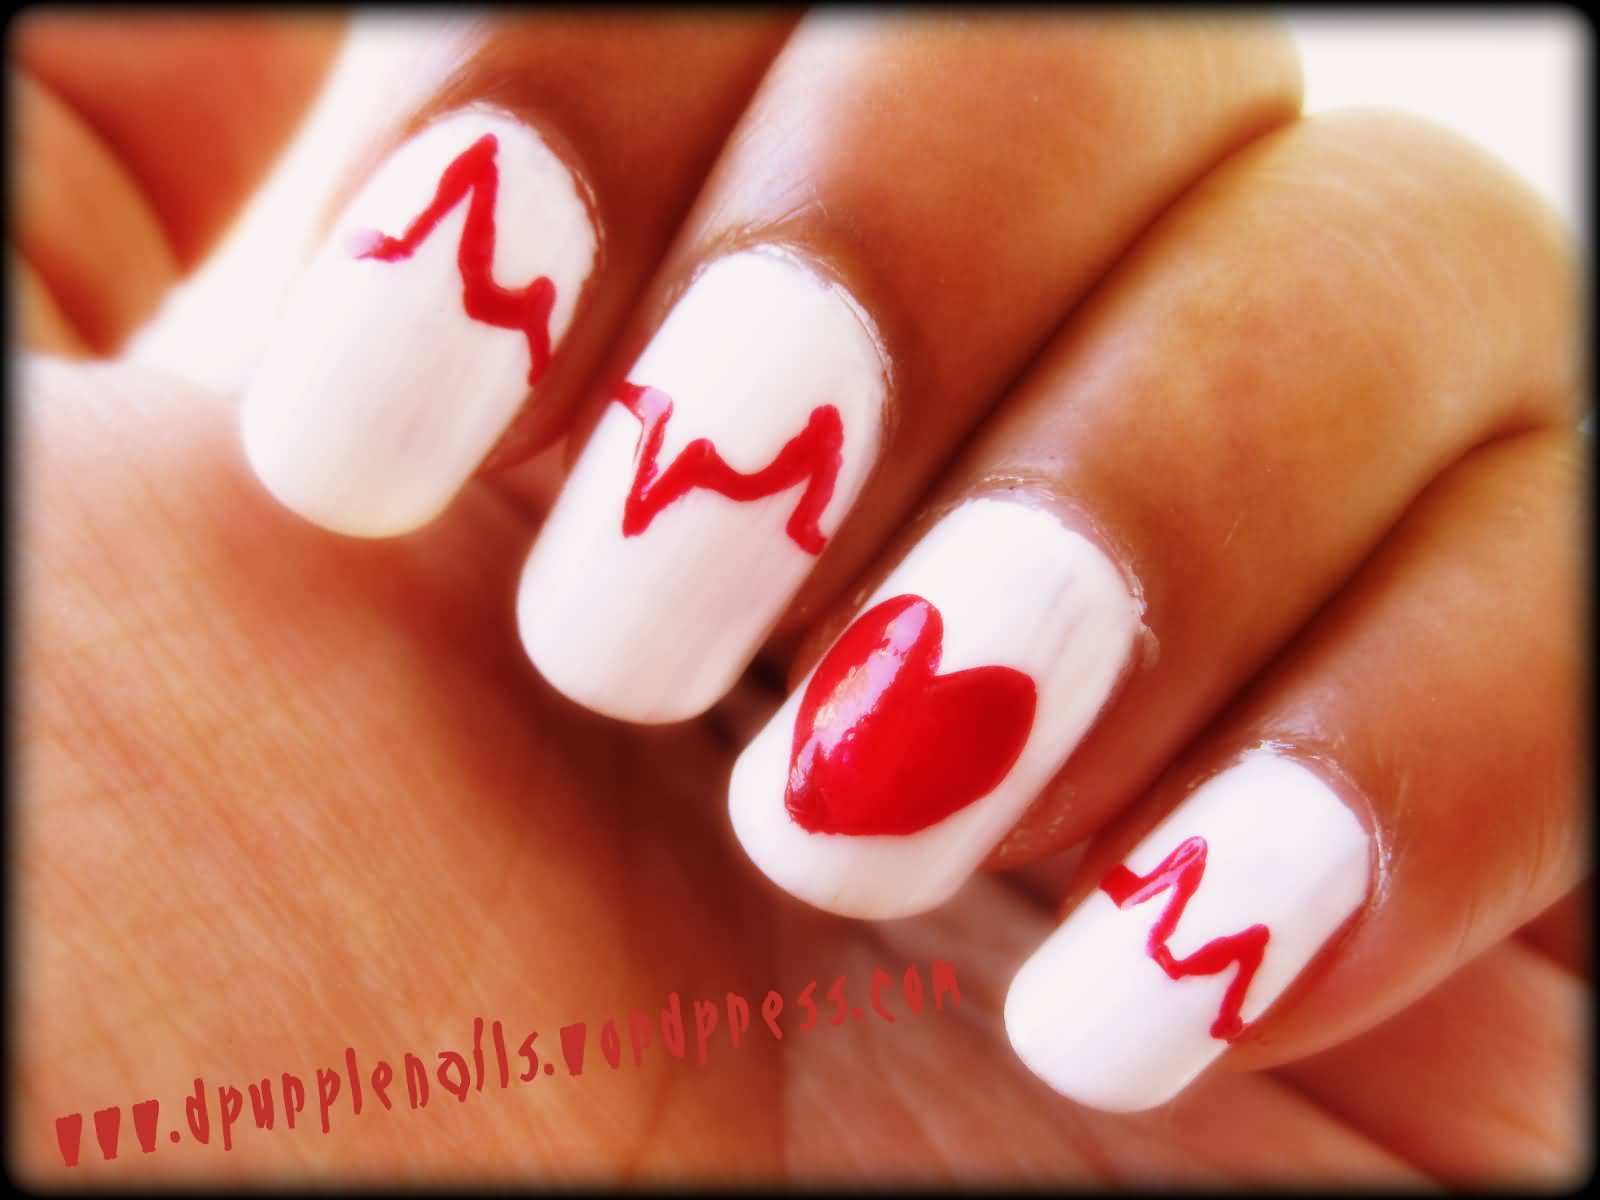 White Nails With Red Heart And Beat Design Nail Art Idea